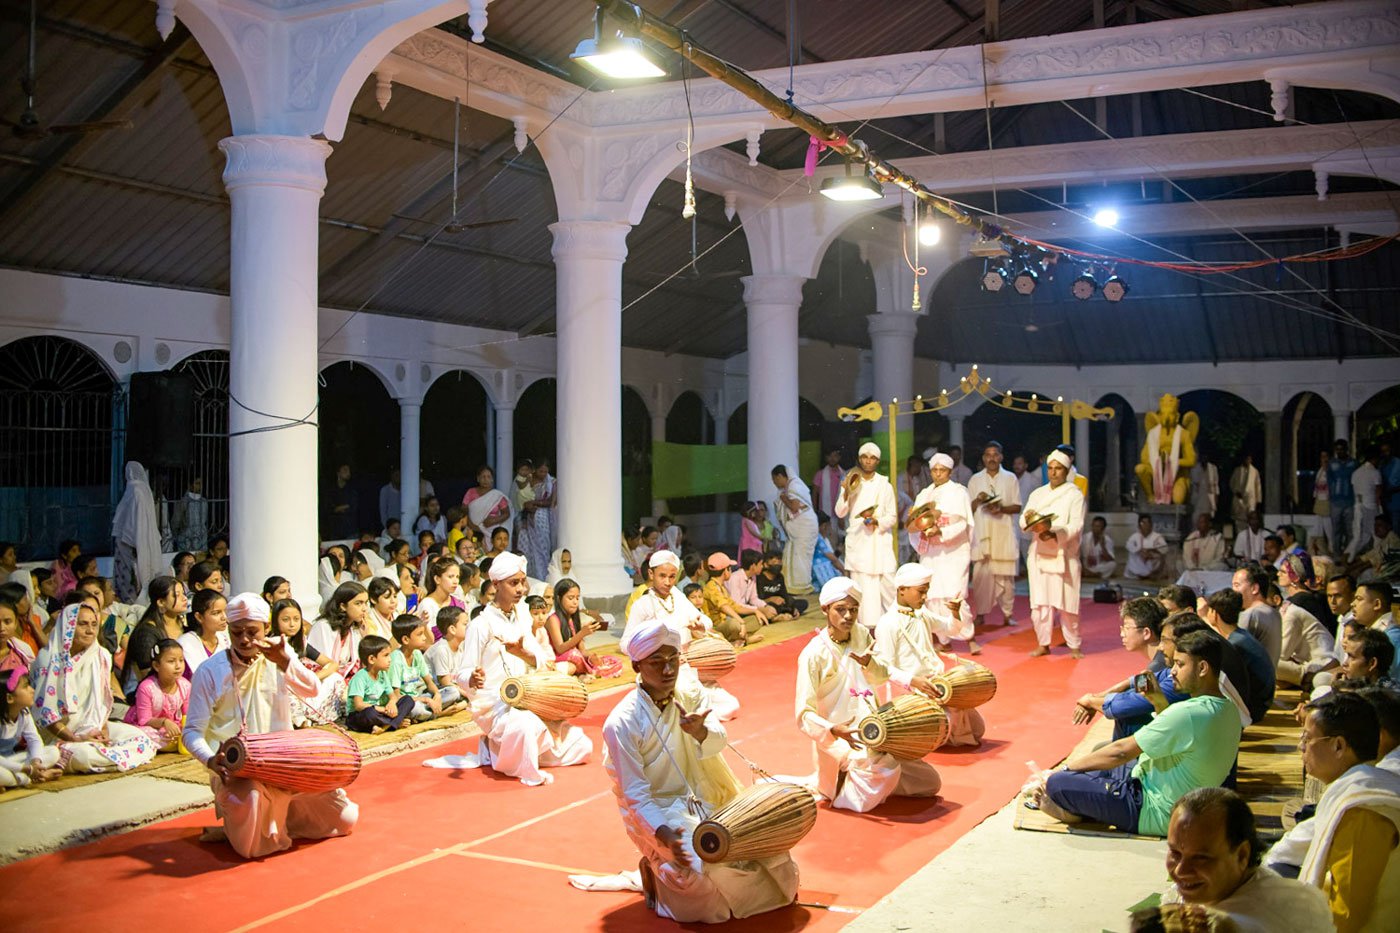 Performance at the namghar; a traditional gayan-bayan curriculum begins with learning to play different taals on the palm of your hands